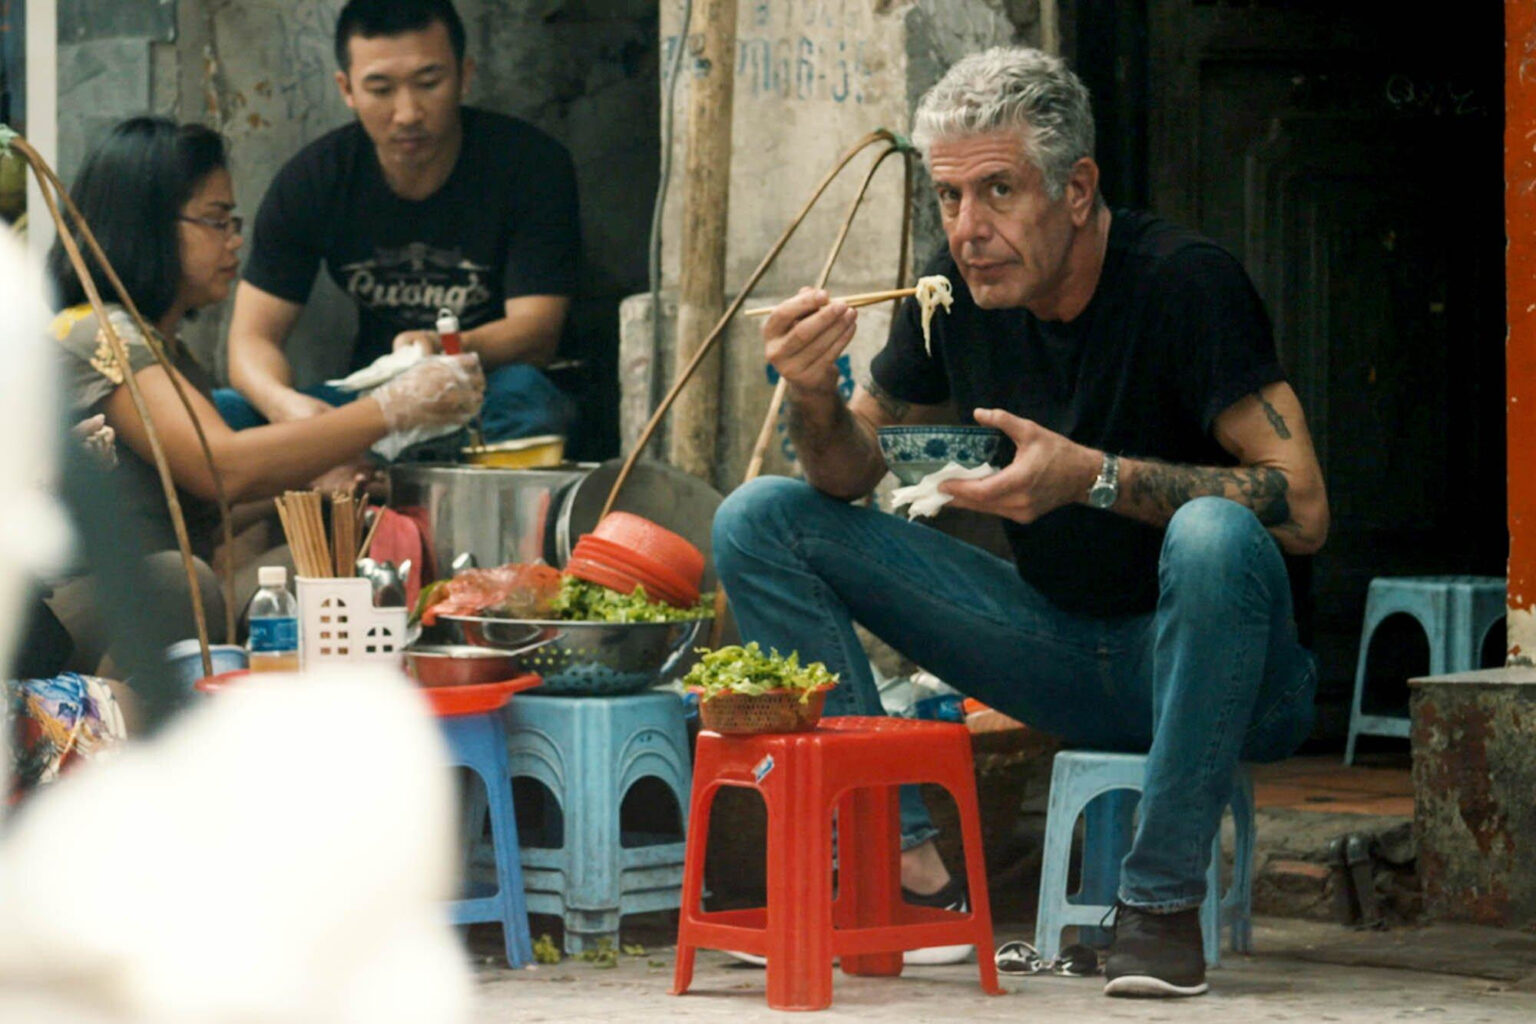 Is Netflix dropping a new show about renowned chef Anthony Bourdain? Dive into the new documentary featuring behind-the-scenes footage from his many series.